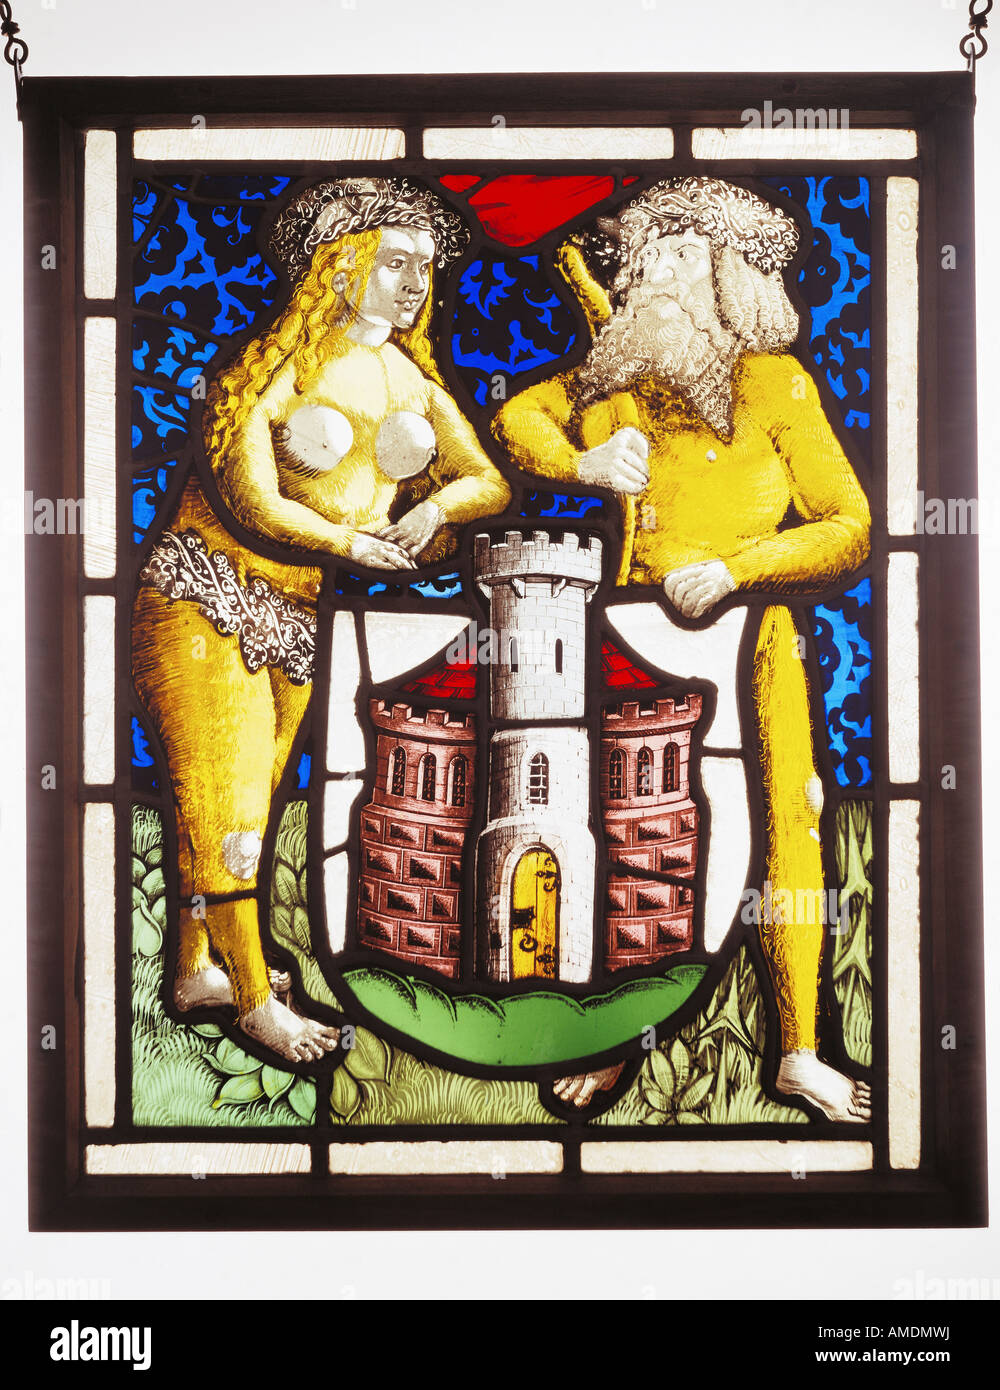 fine arts, glass painting, coat of arms of the town of Meersburg, glass, council chamber, Meersburg, , Artist's Copyright has not to be cleared Stock Photo